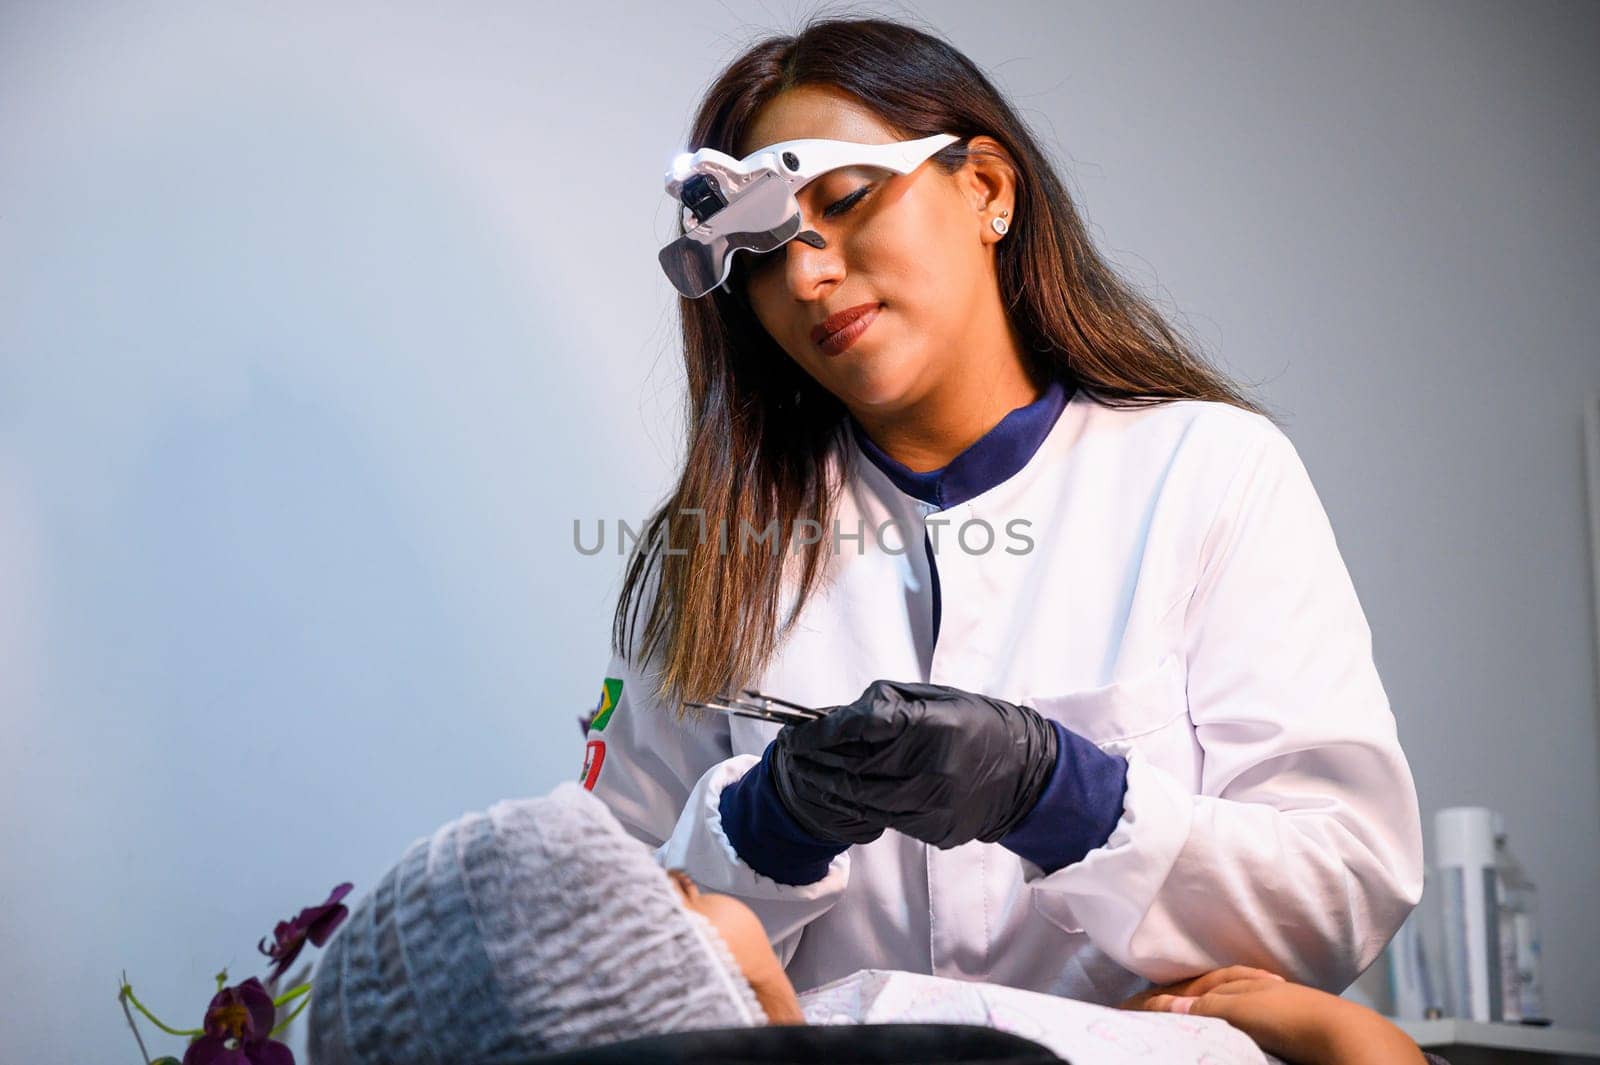 Female dentist examines a patient's teeth in a dental office setting